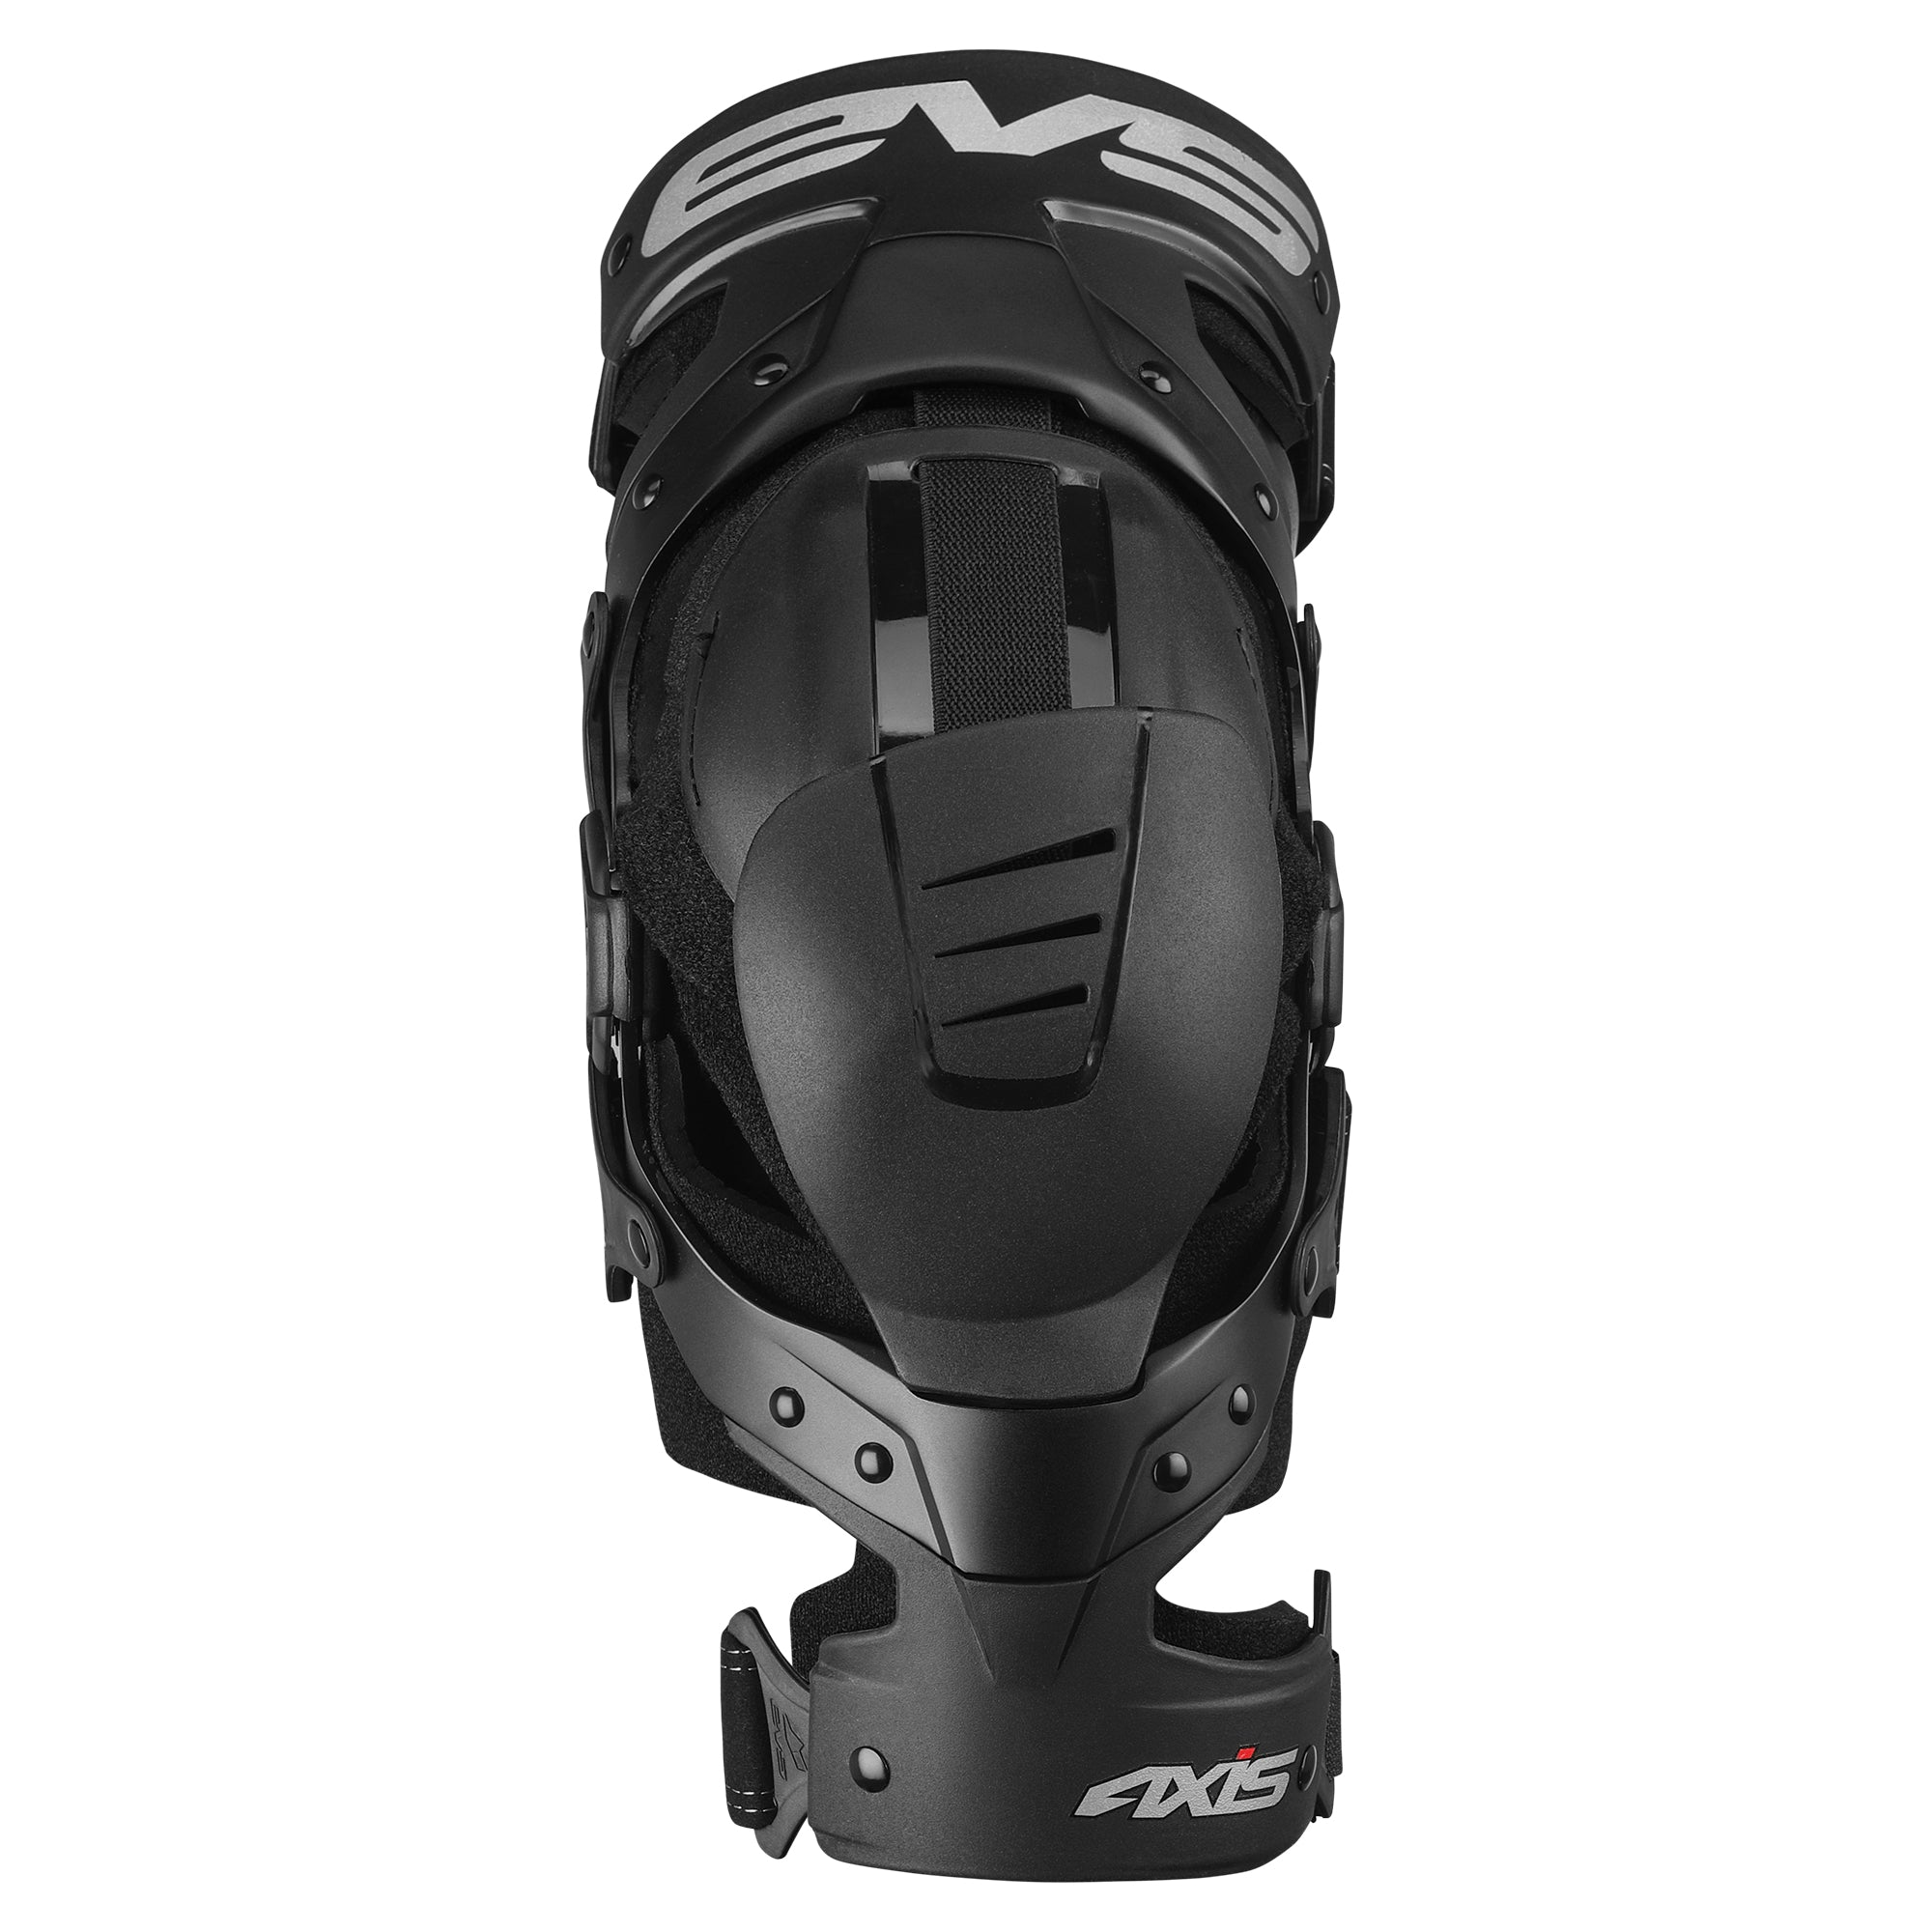 SDG Distribution - EVS Sports : Motocross Knee Braces and Protections